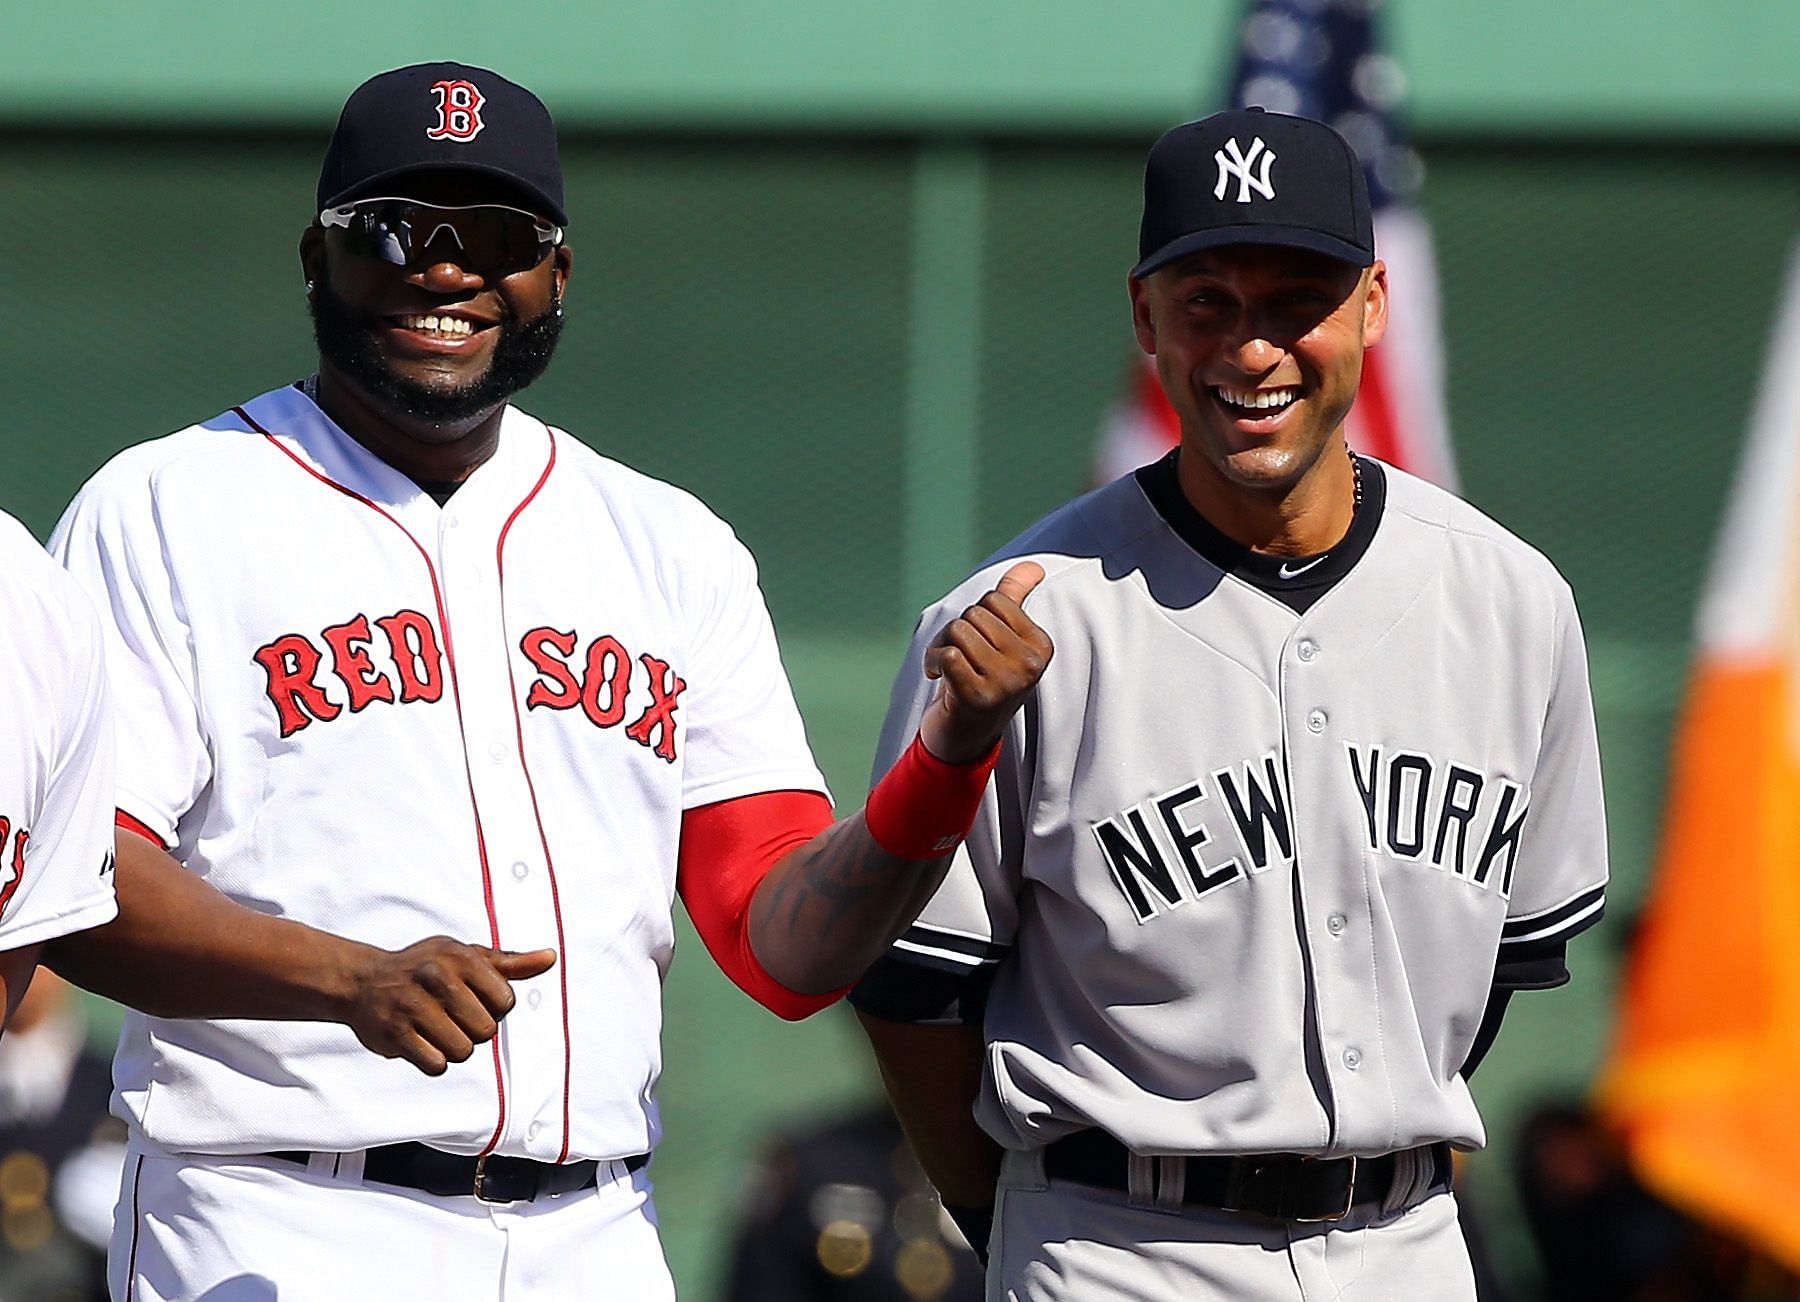 SEE IT: David Ortiz says 'hopefully' he gets a jersey retirement ceremony  at Fenway Park on par with Derek Jeter's Yankees bash – New York Daily News